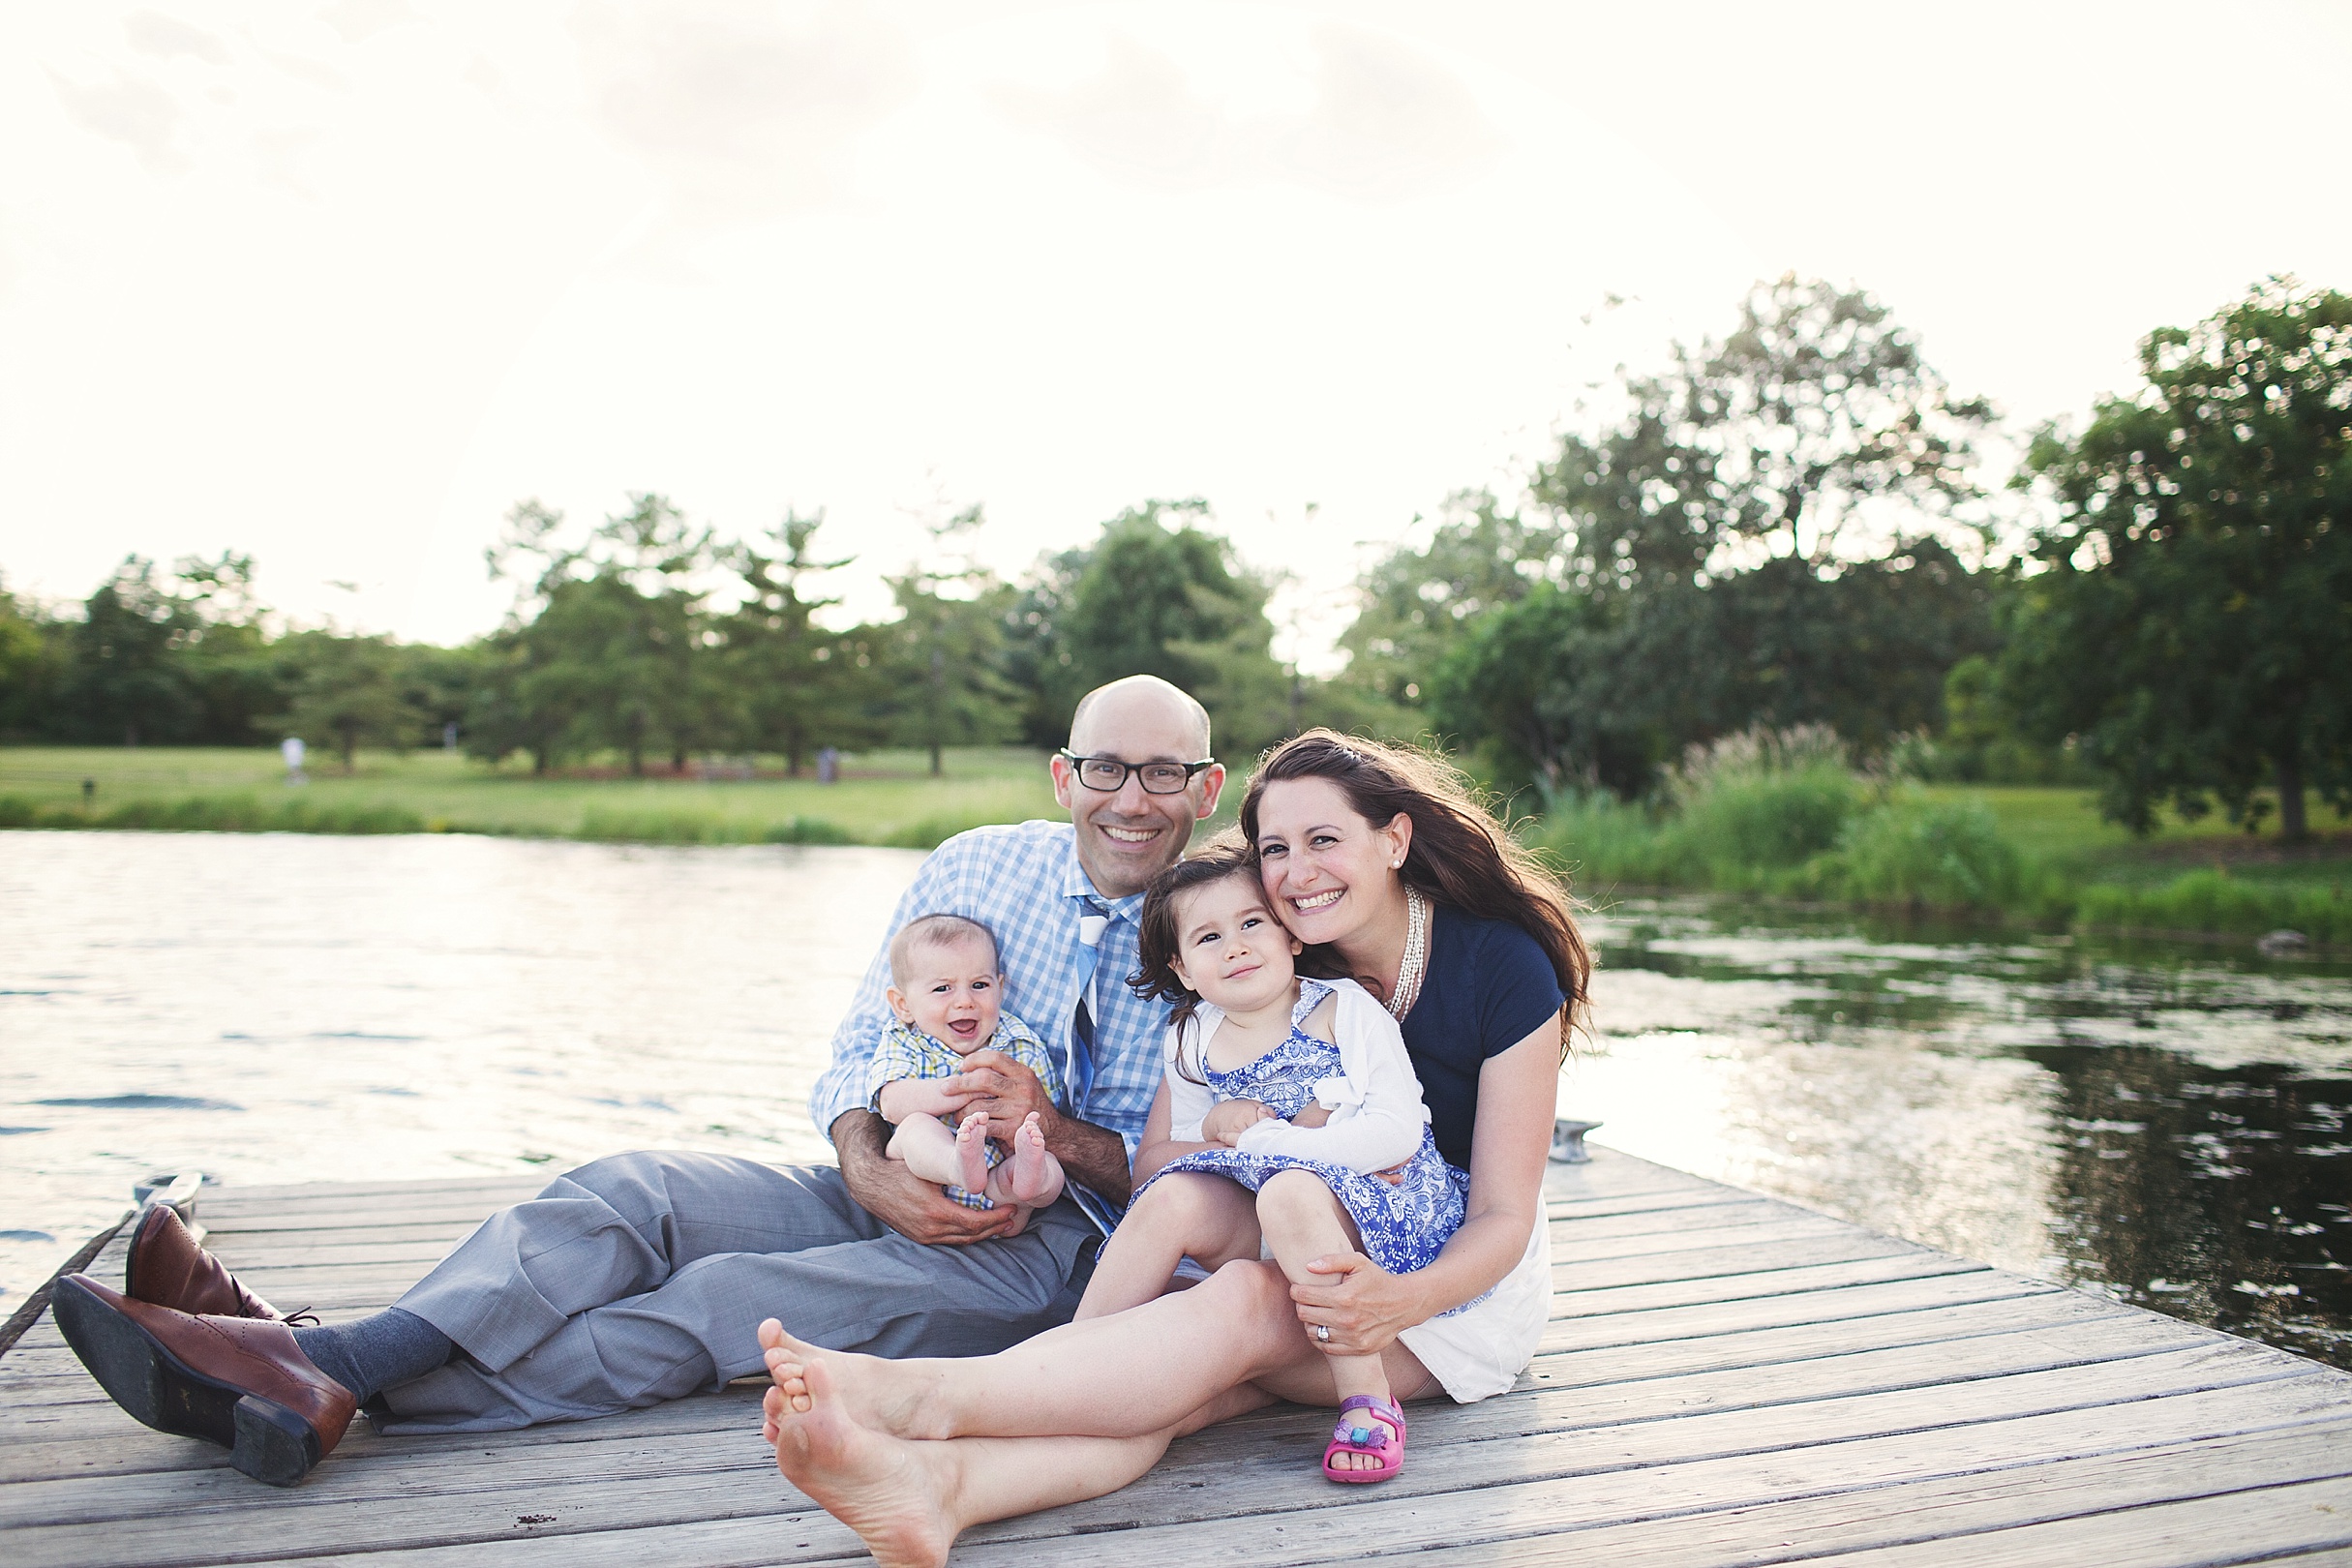 Rosalyn of Rosalyn Ash Photography is a College Station Newborn Photographer also specializing in family and child photography in College Station, Texas and surrounding areas including but not limited to Bryan, Houston, Cypress, Austin and Waco.